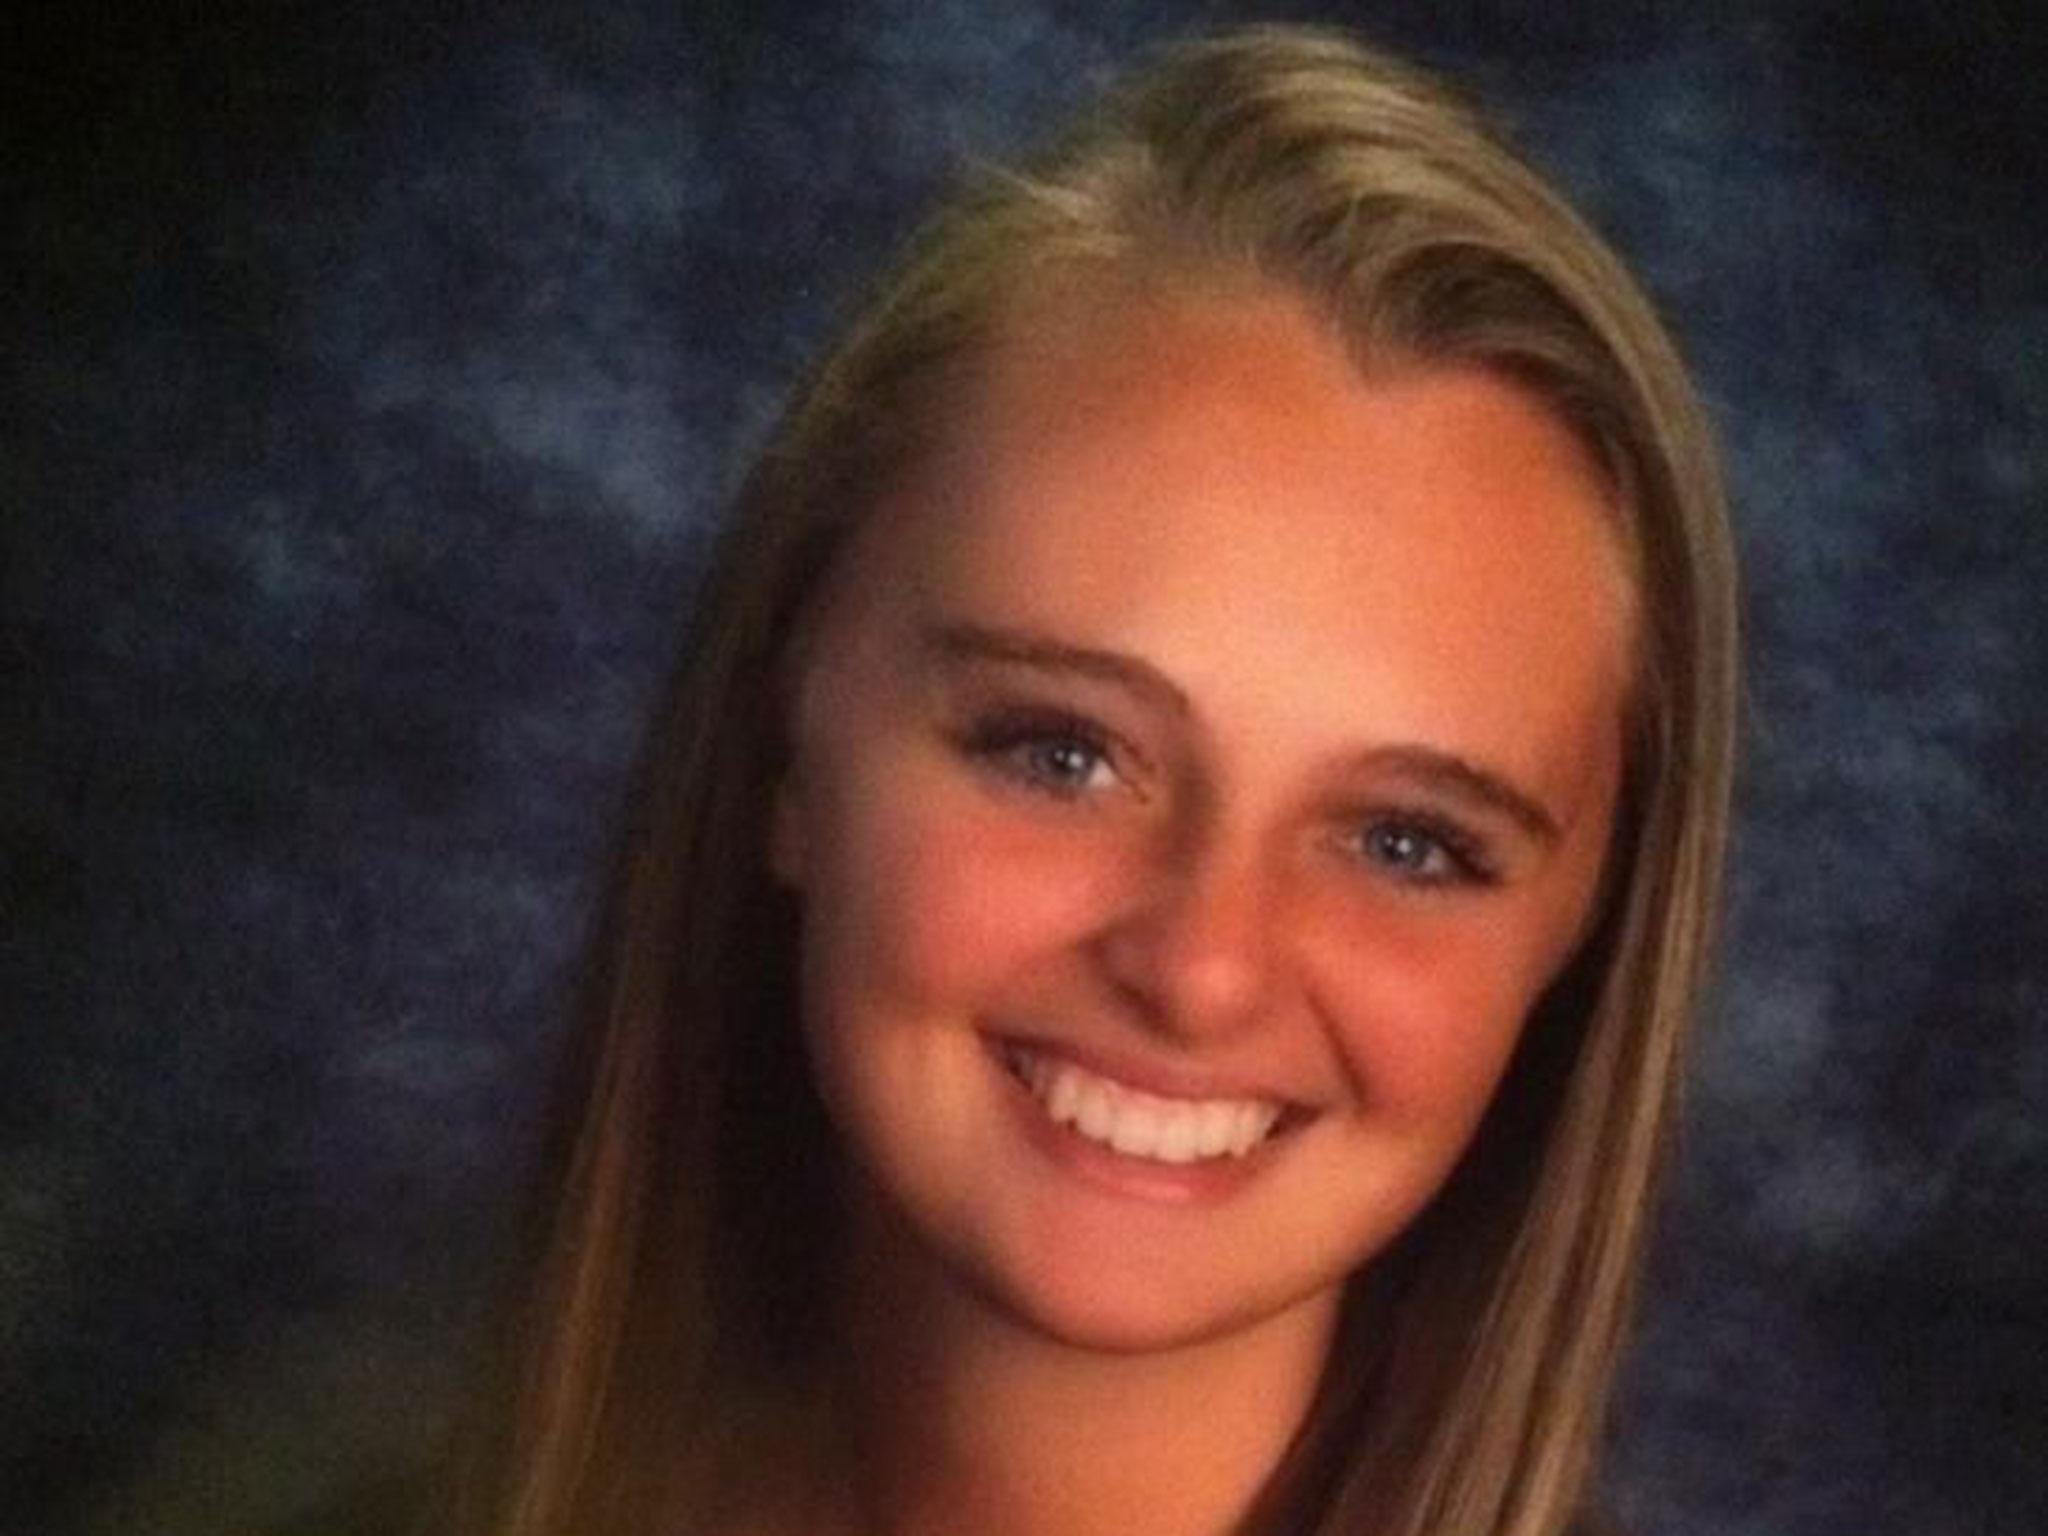 US teen Michelle Carter faces manslaughter charge for 'encouraging